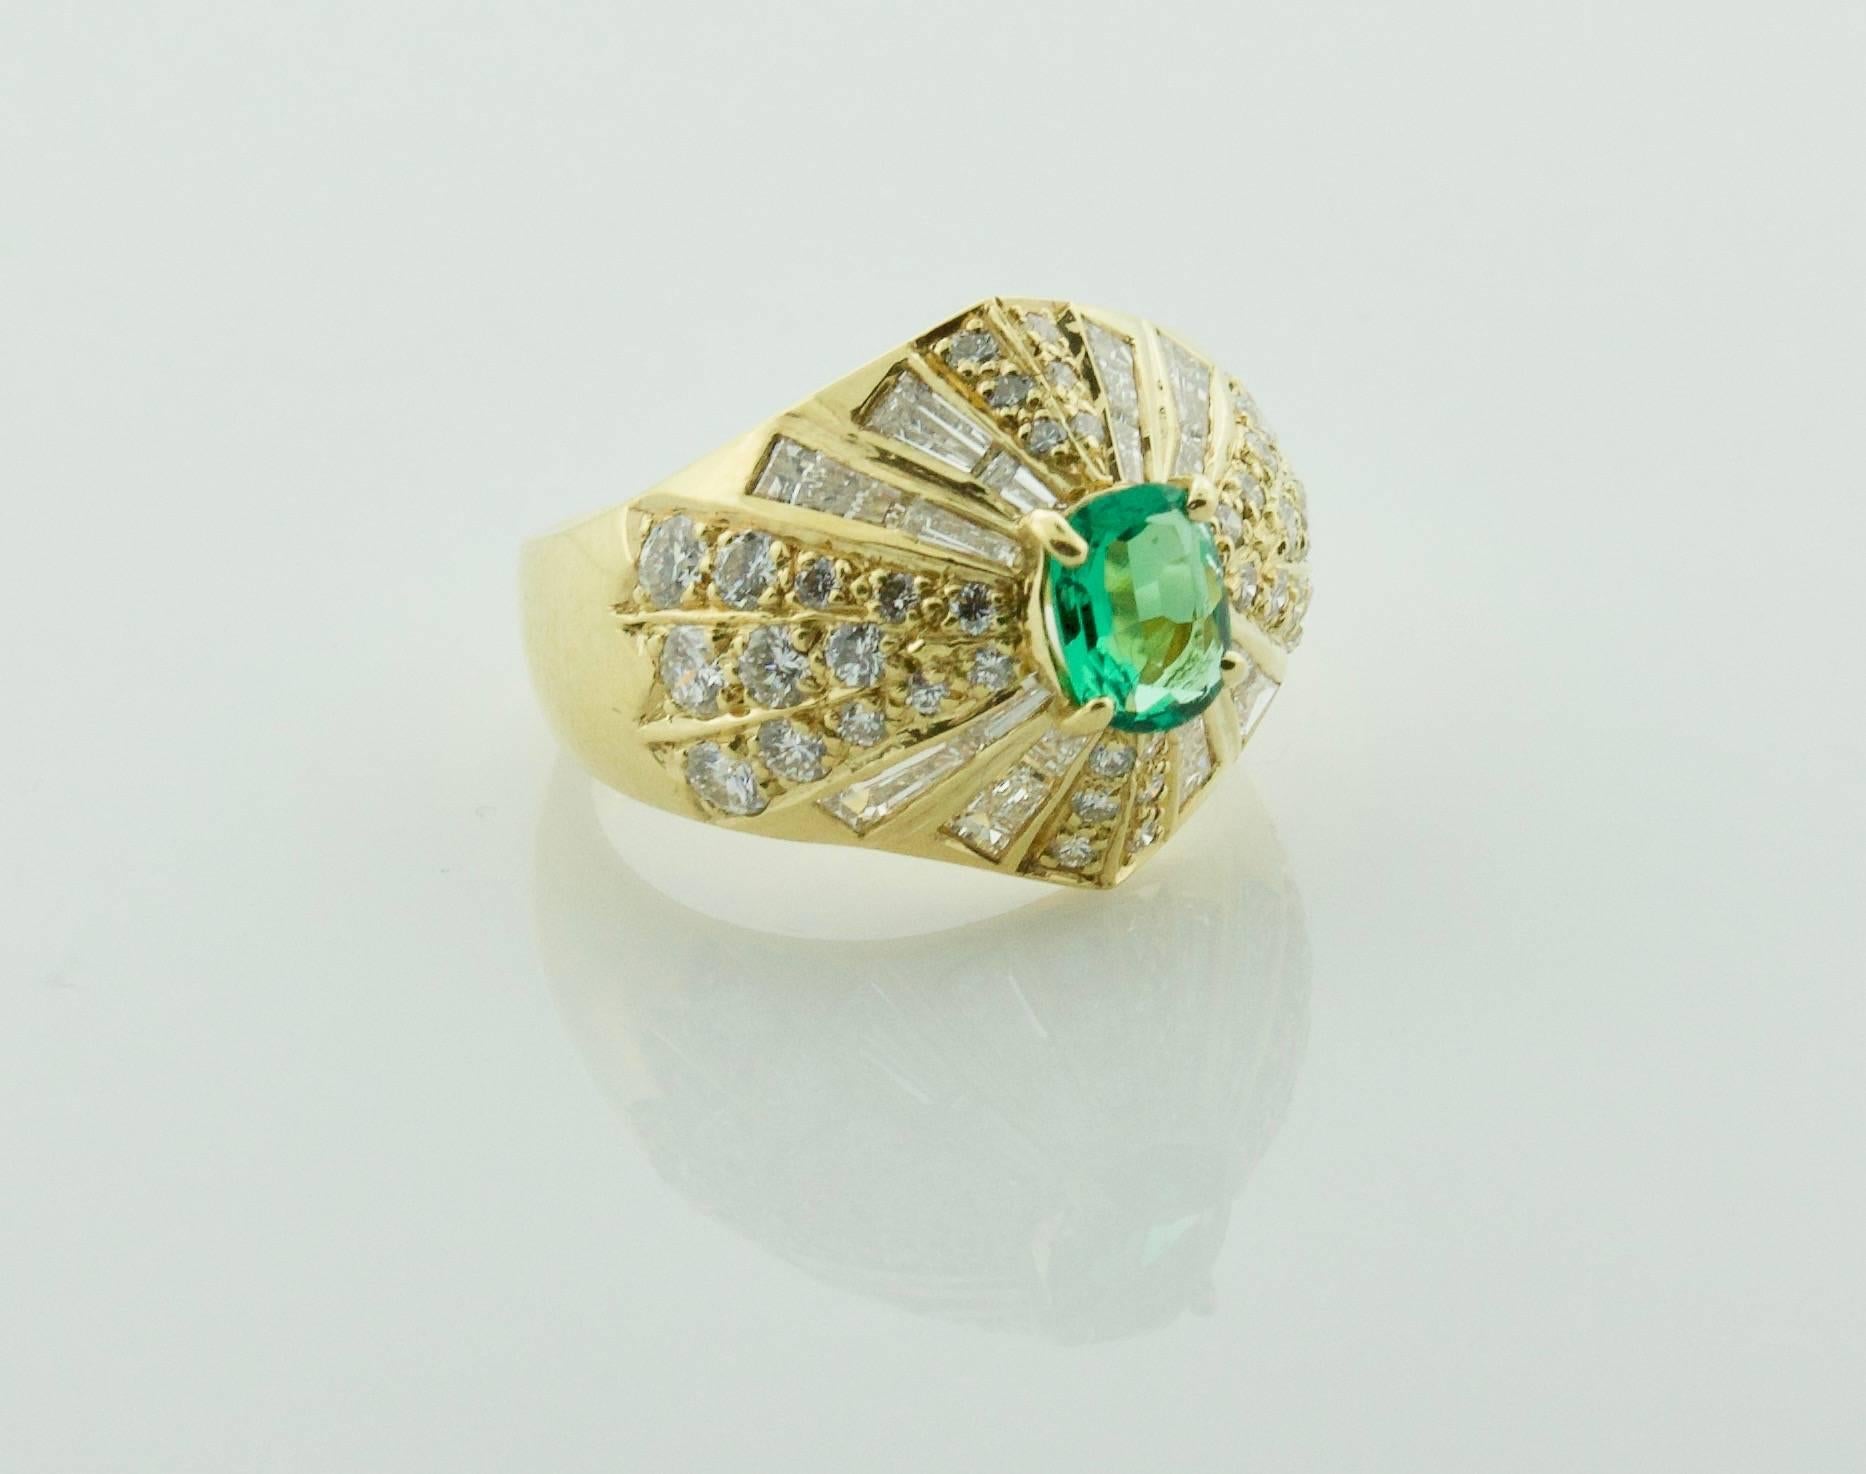 Emerald and Diamond Terrell and Zimmelman 18k Yellow Gold Ring
Designed by Bill Bates
One Bright and Brilliant Green Emerald weighing .55 carats
Sixteen Round Brilliant and Tapered Baguette  Cut Diamonds weighing 2.01 carats GH VVS-SI1
Stamped T-Z
